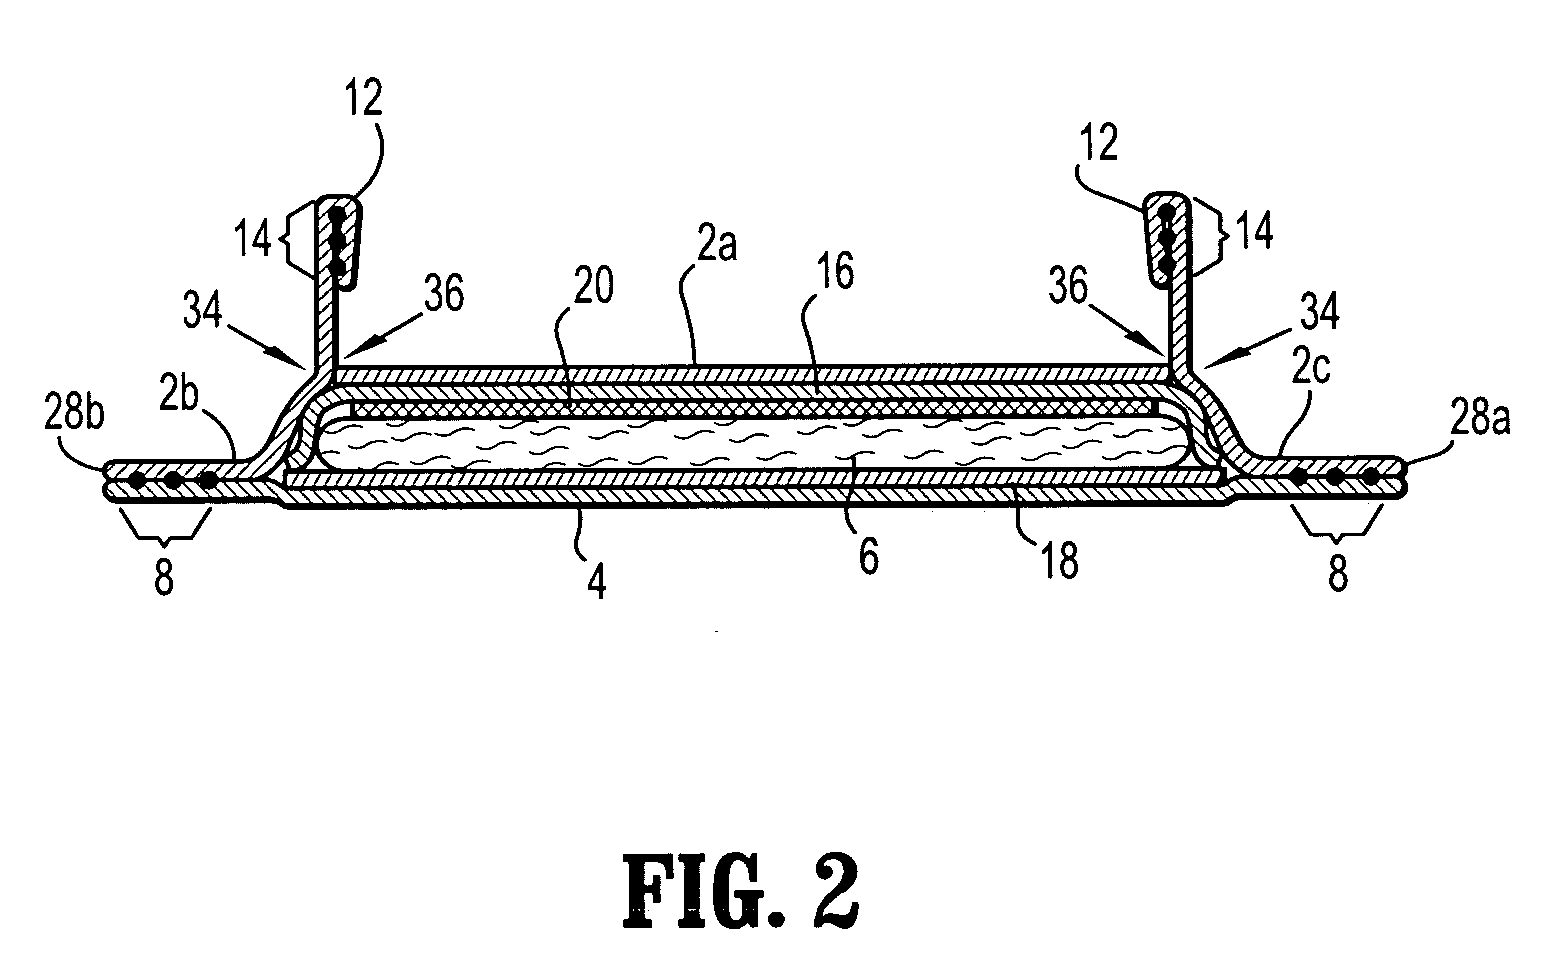 Tow-based absorbent articles with a single casing sheet